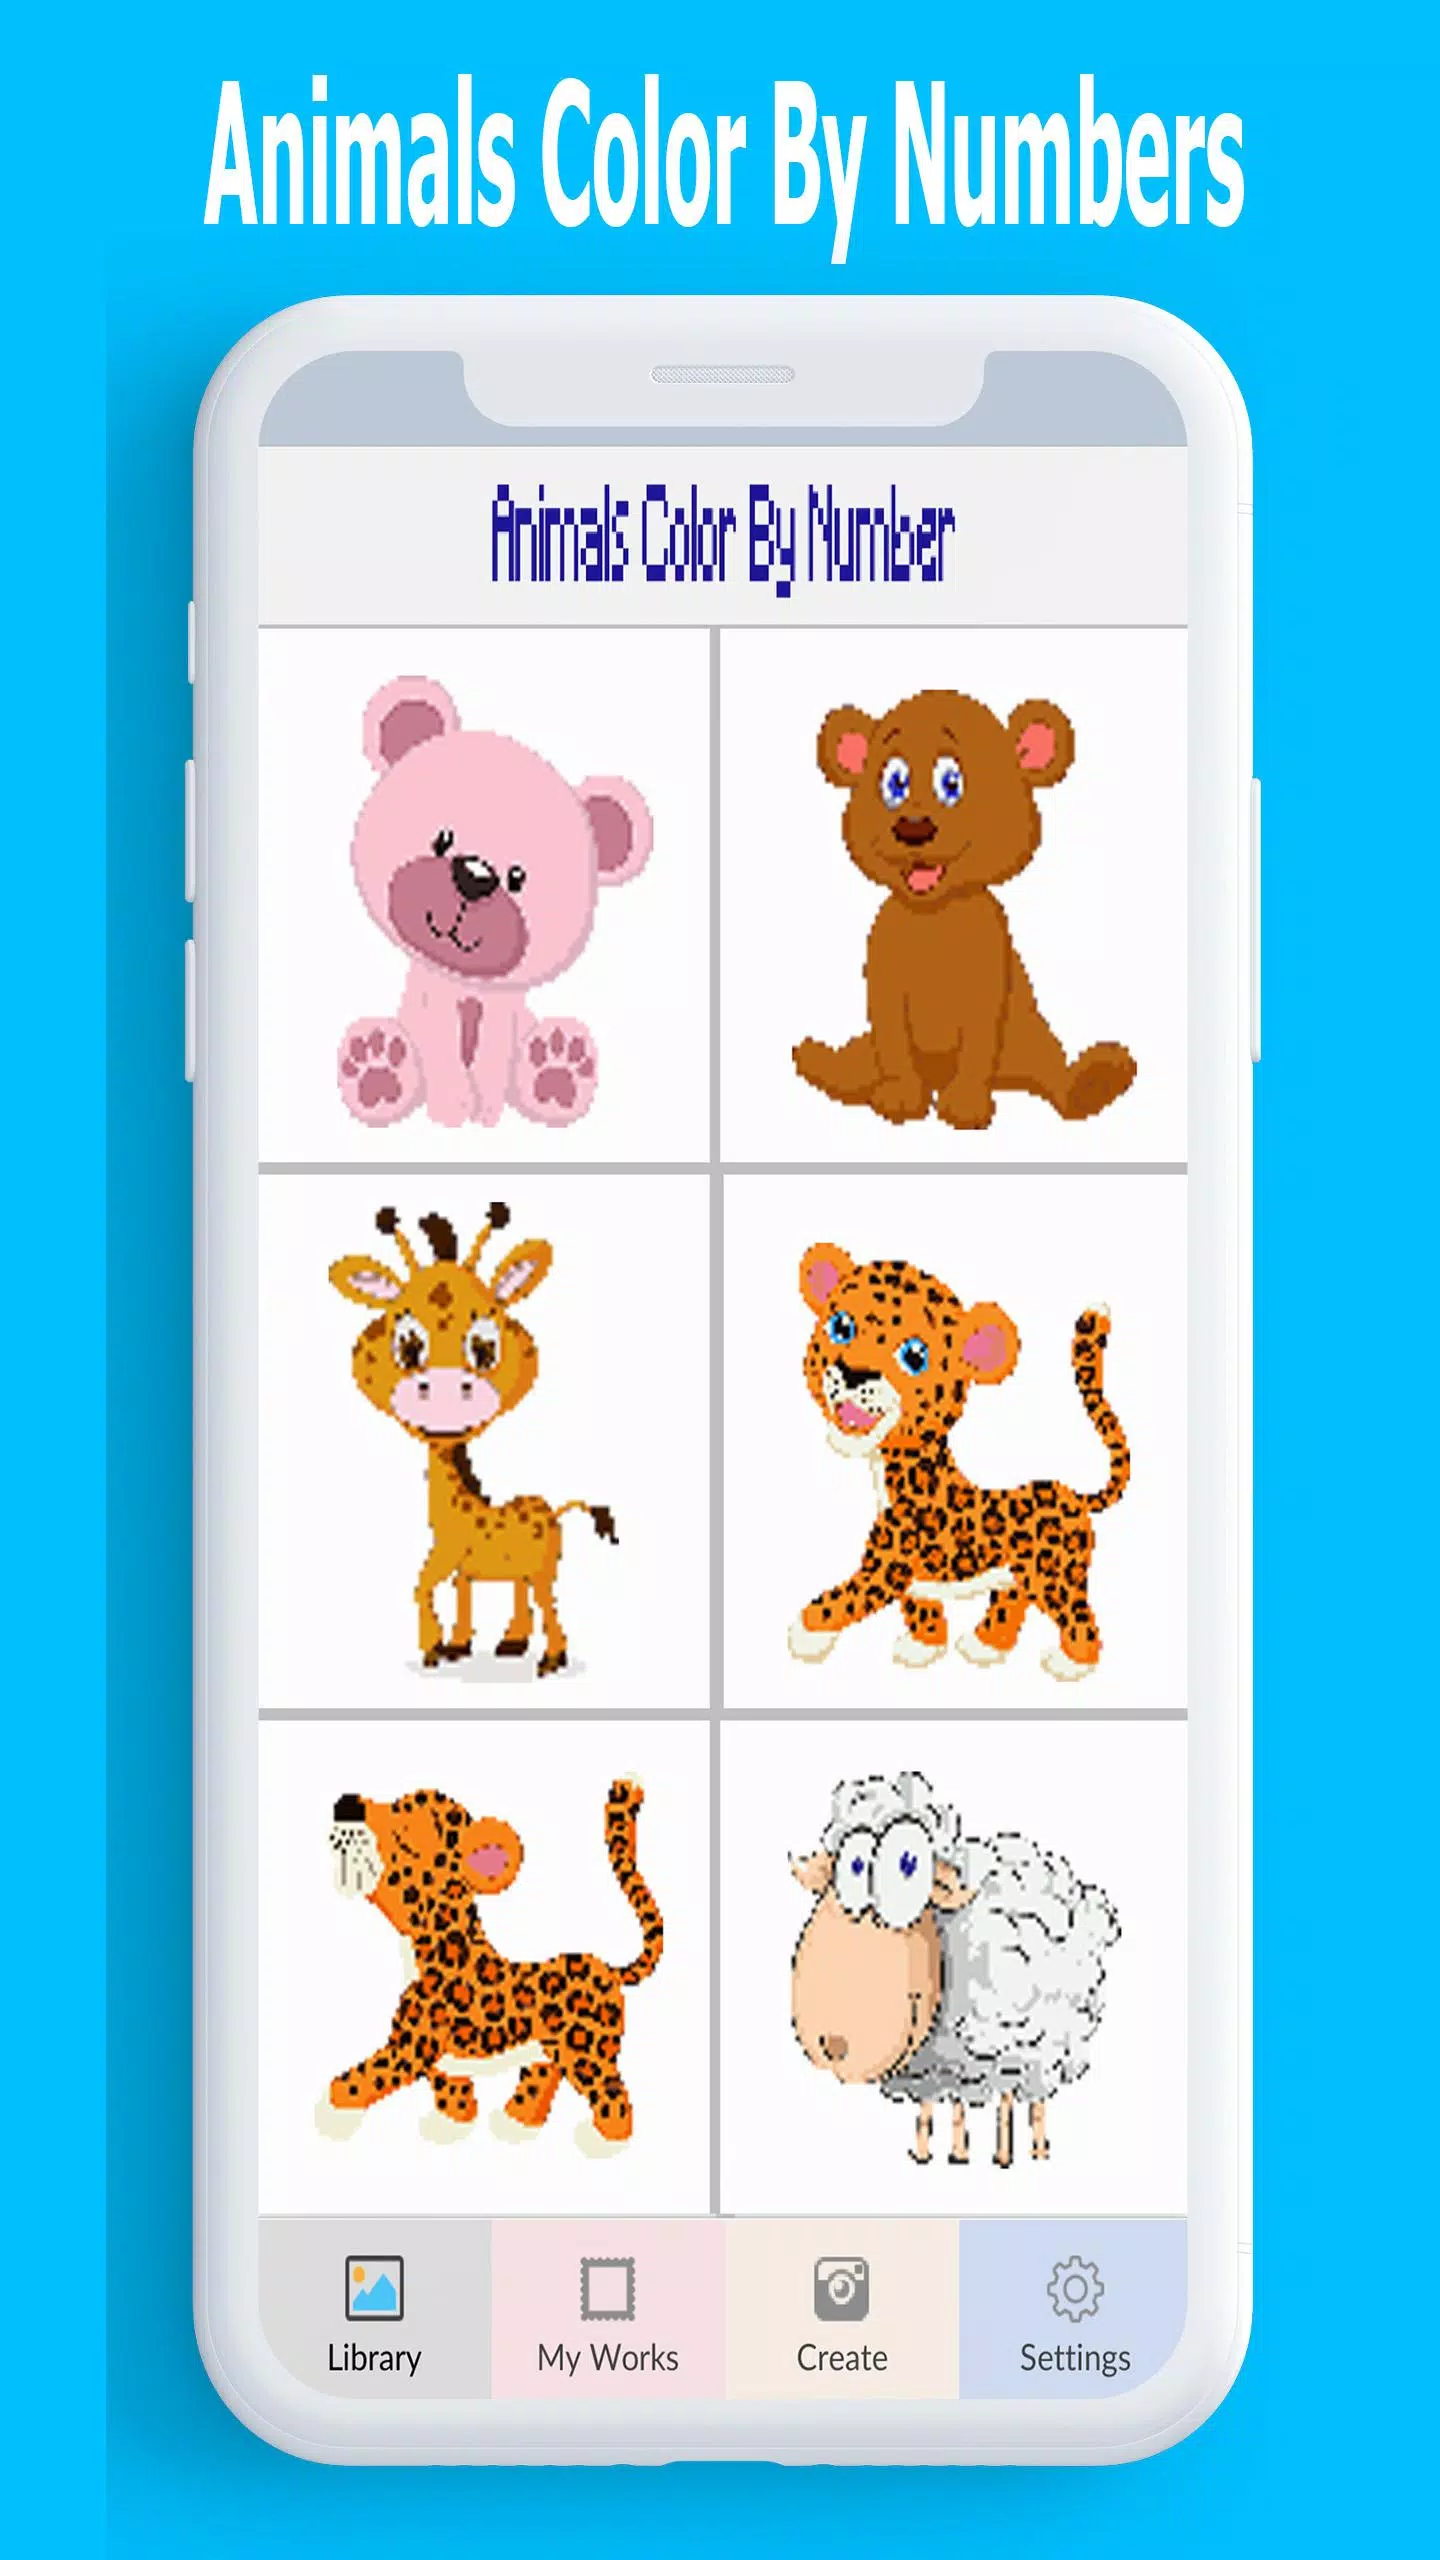 Animals Color By Number, Animal Coloring Book for Android   APK ...